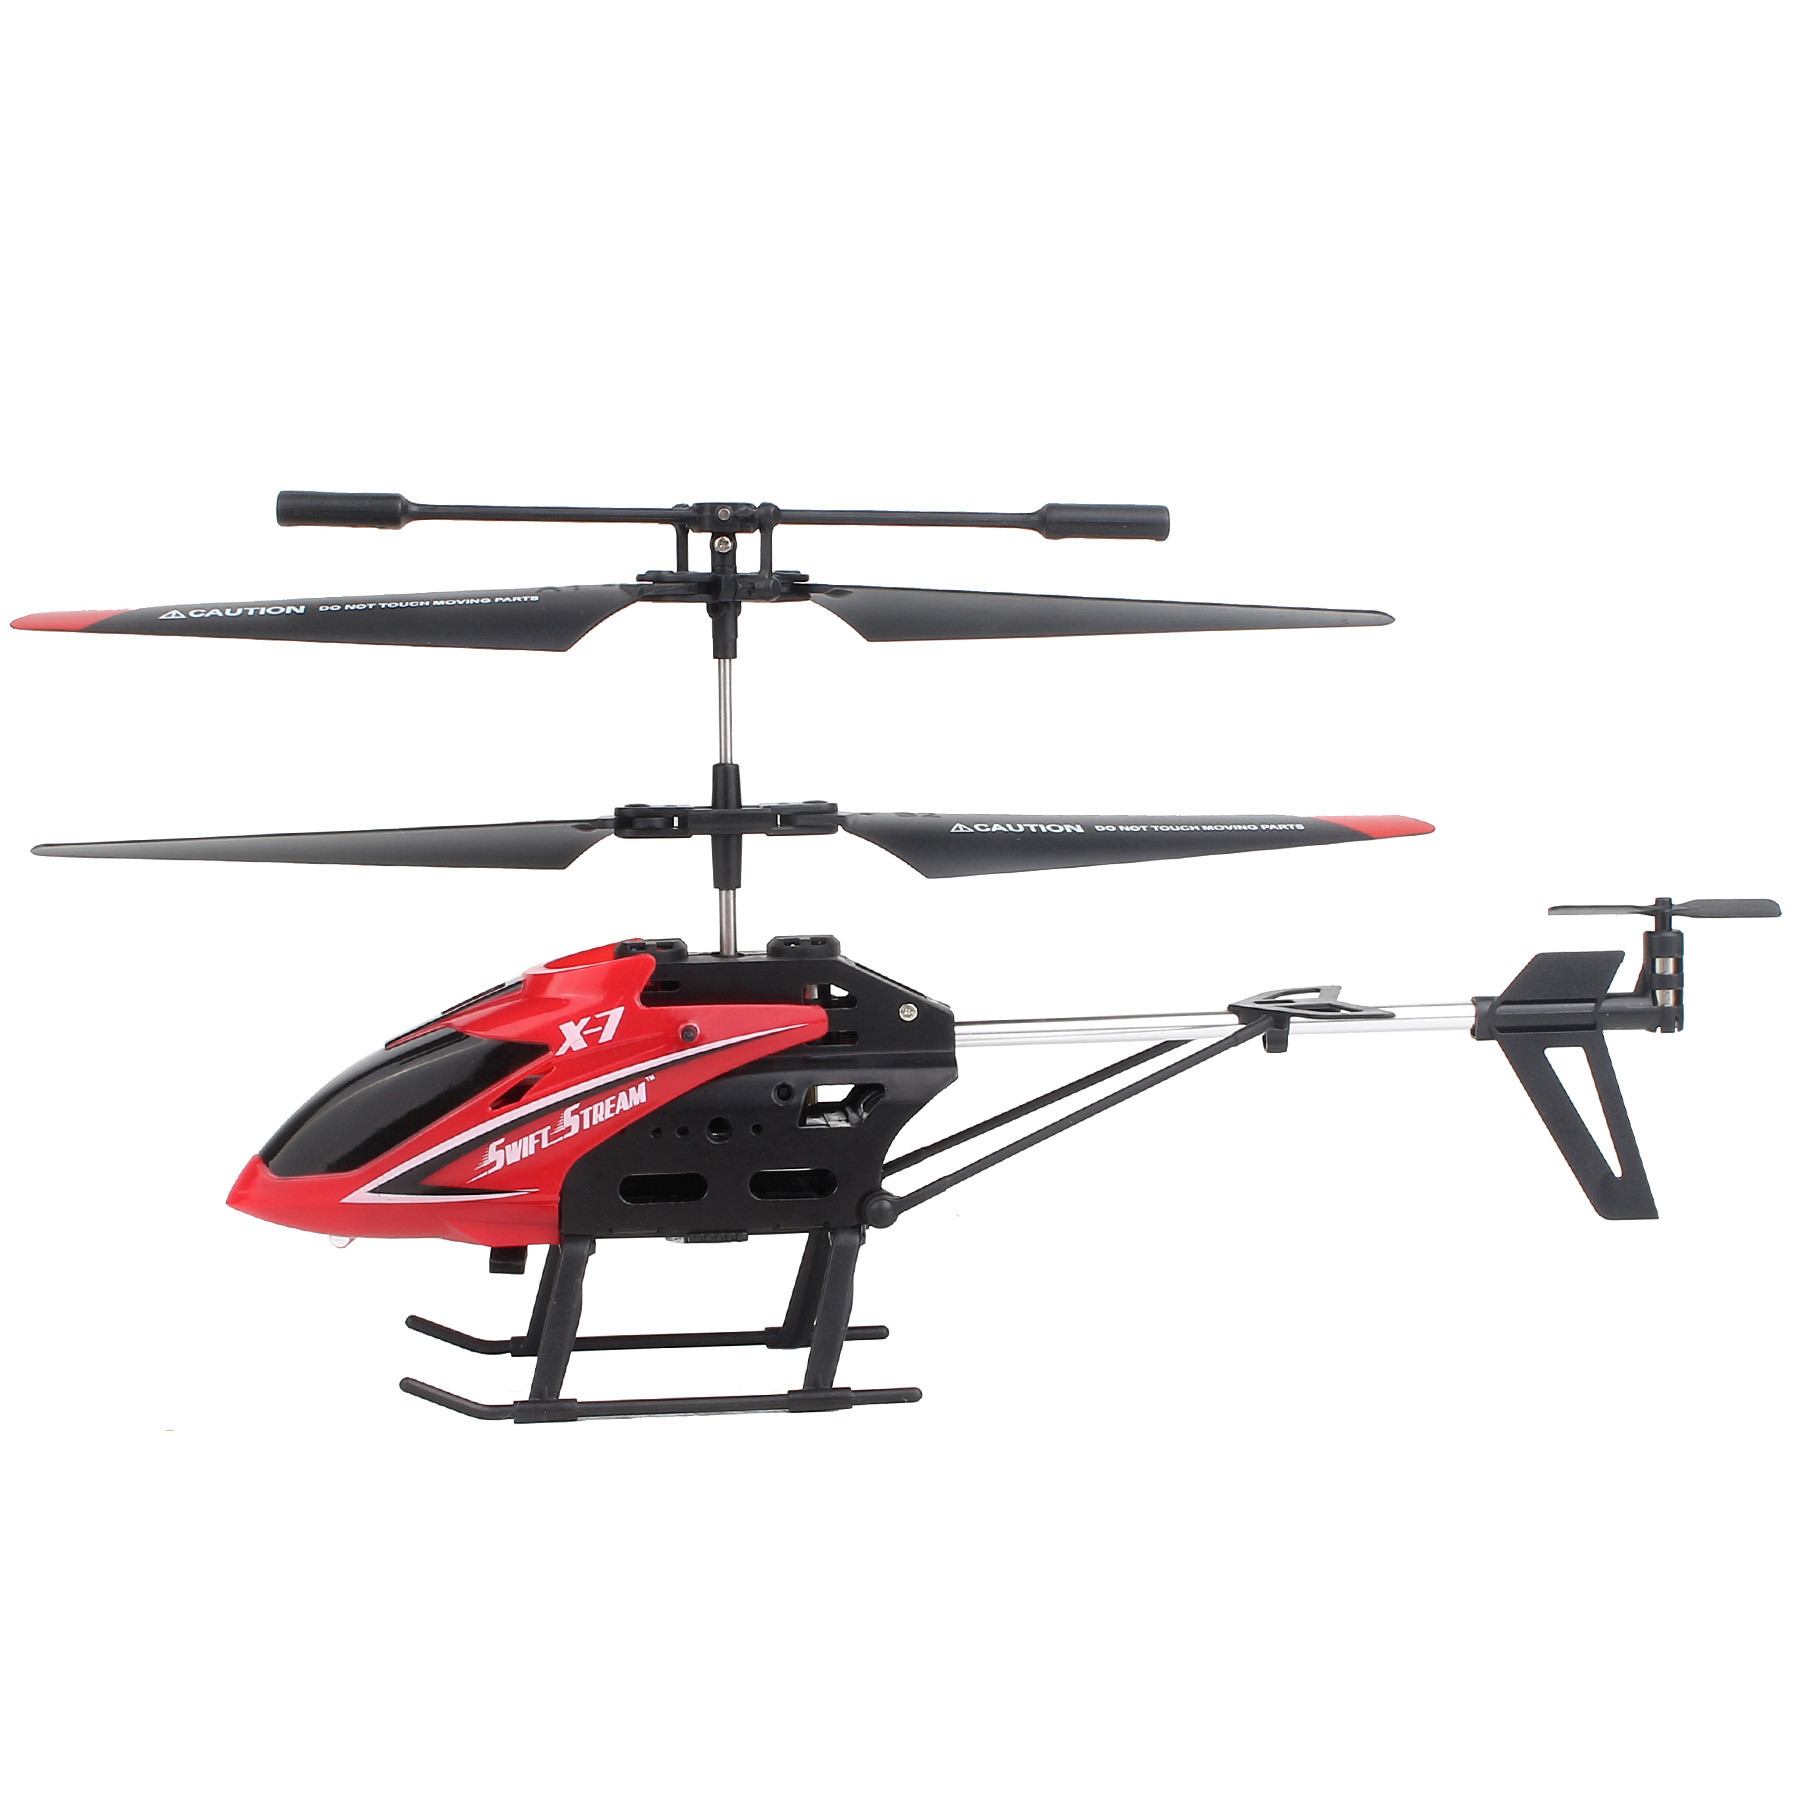 Swift Stream RC  Remote Control Helicopter, Red - image 4 of 5